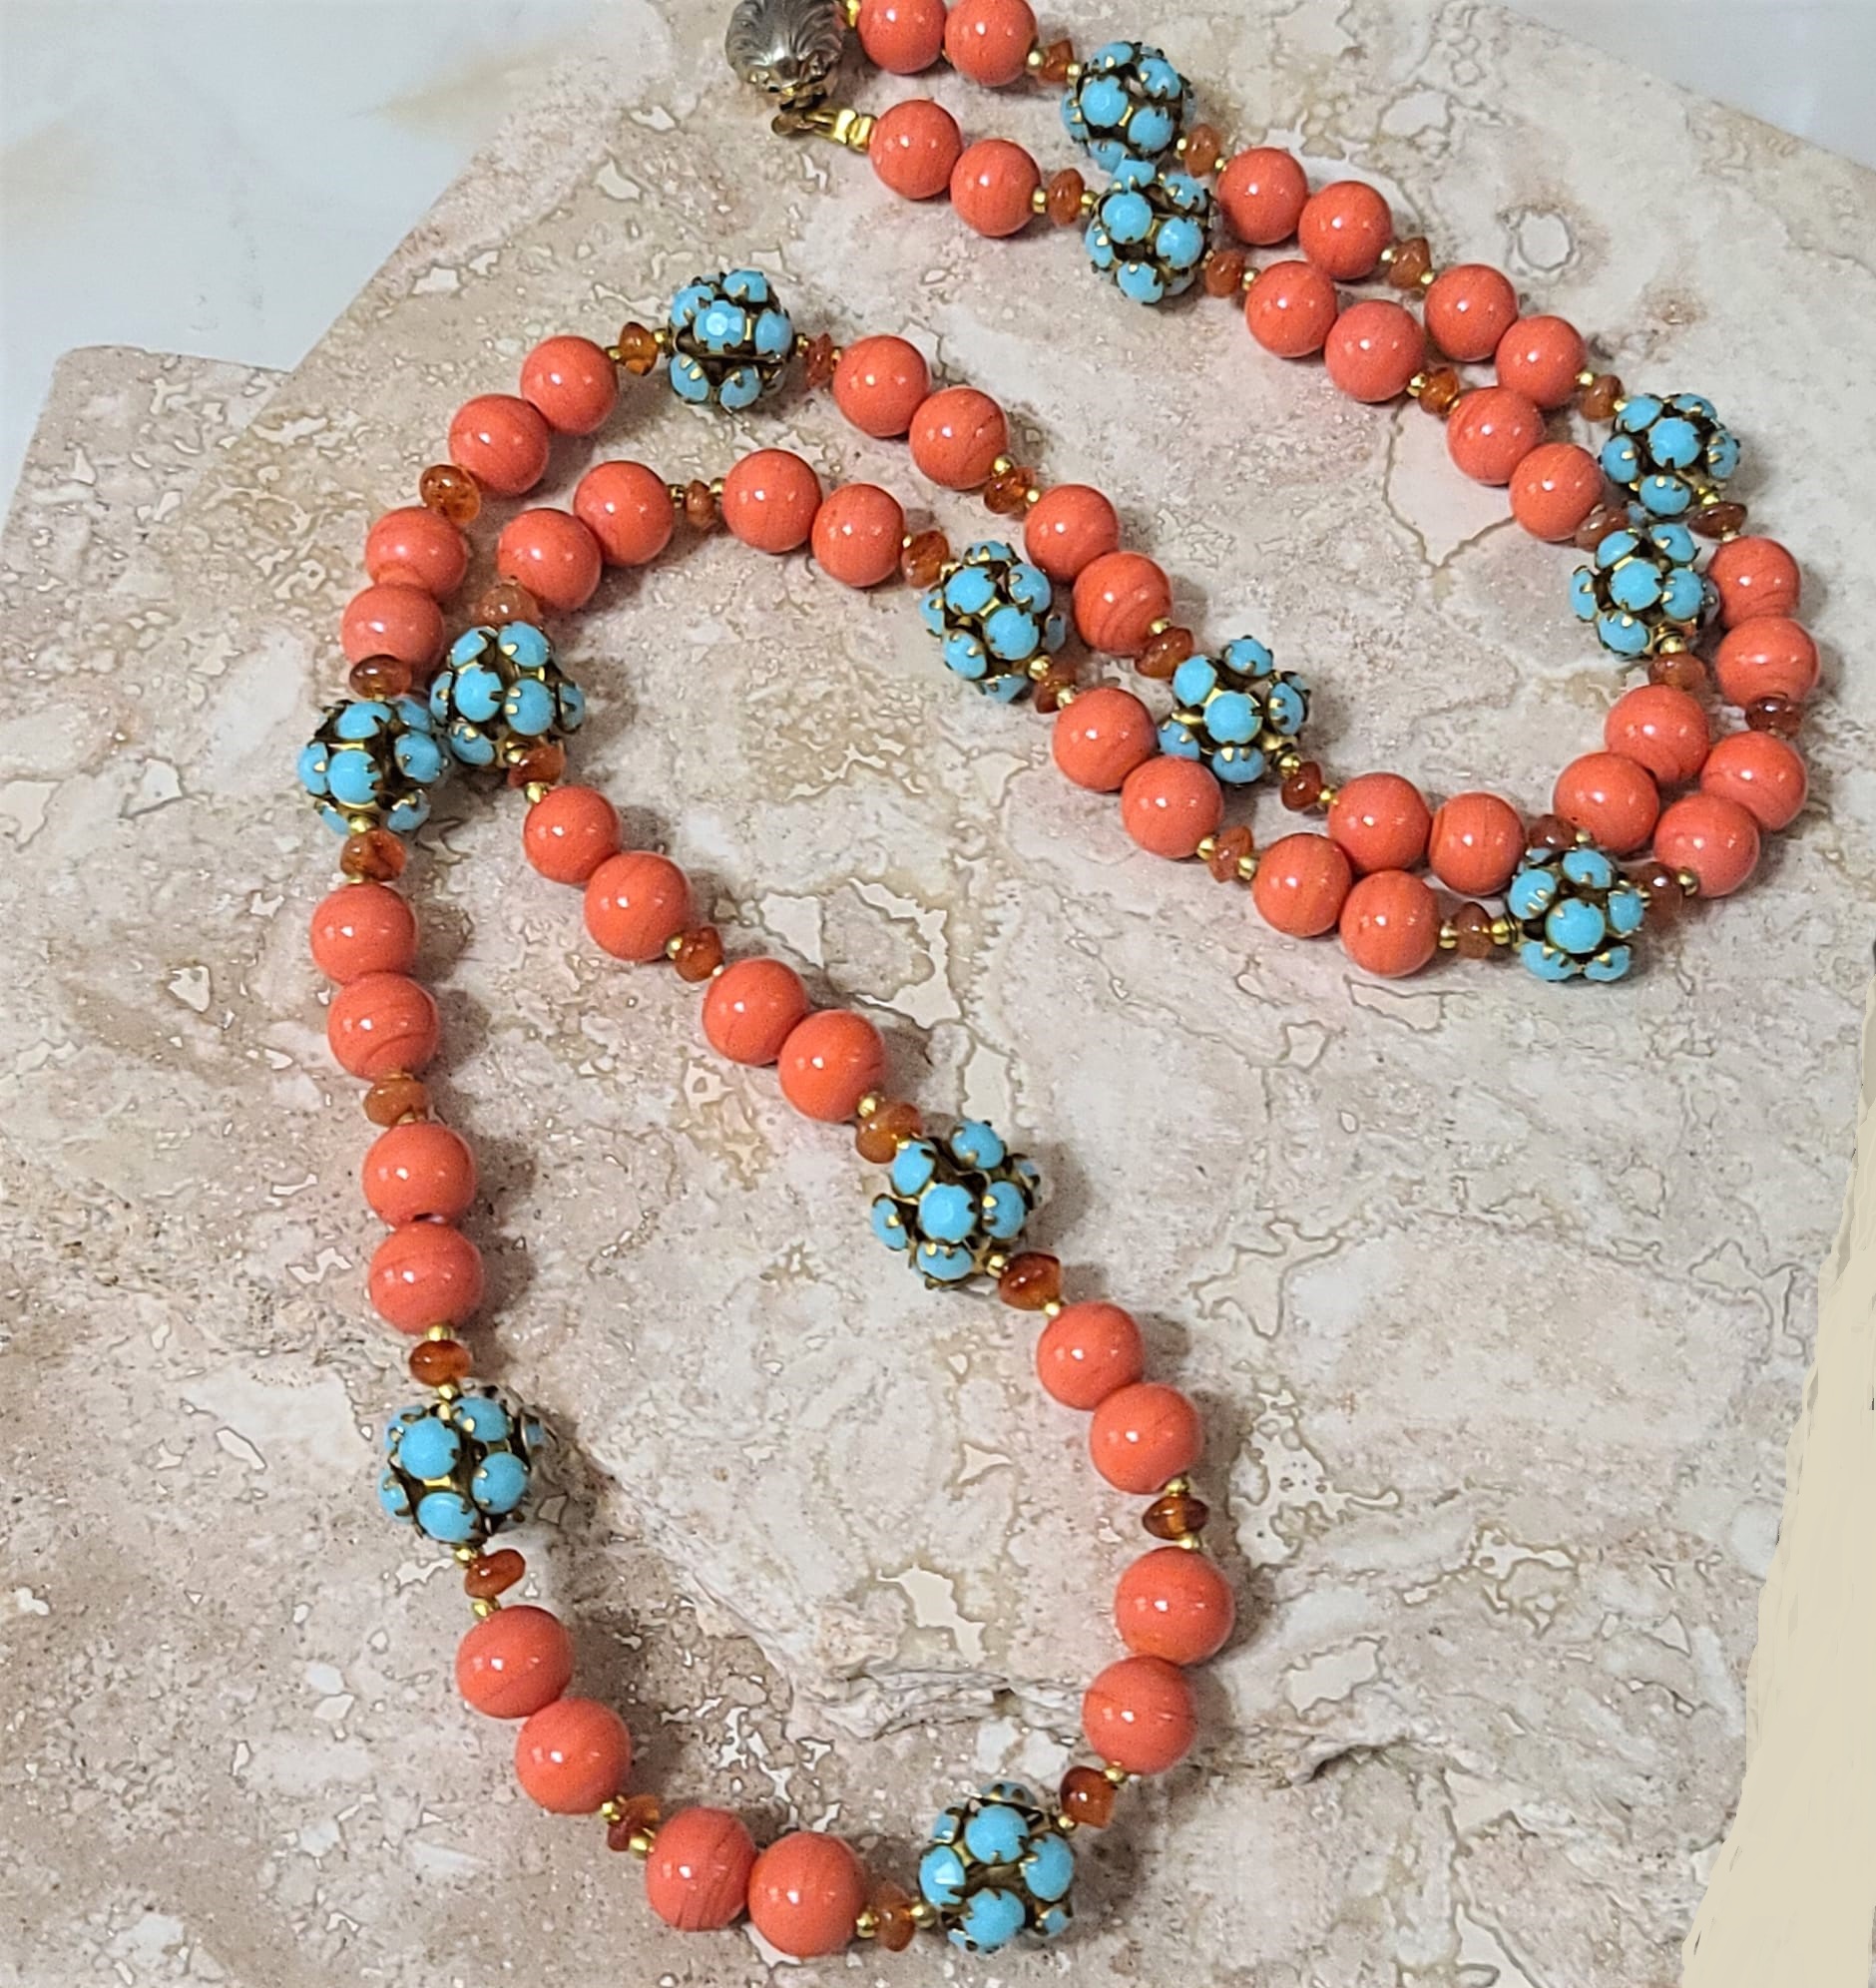 Orange and Turquoise bead necklace with vintage scallop clasp